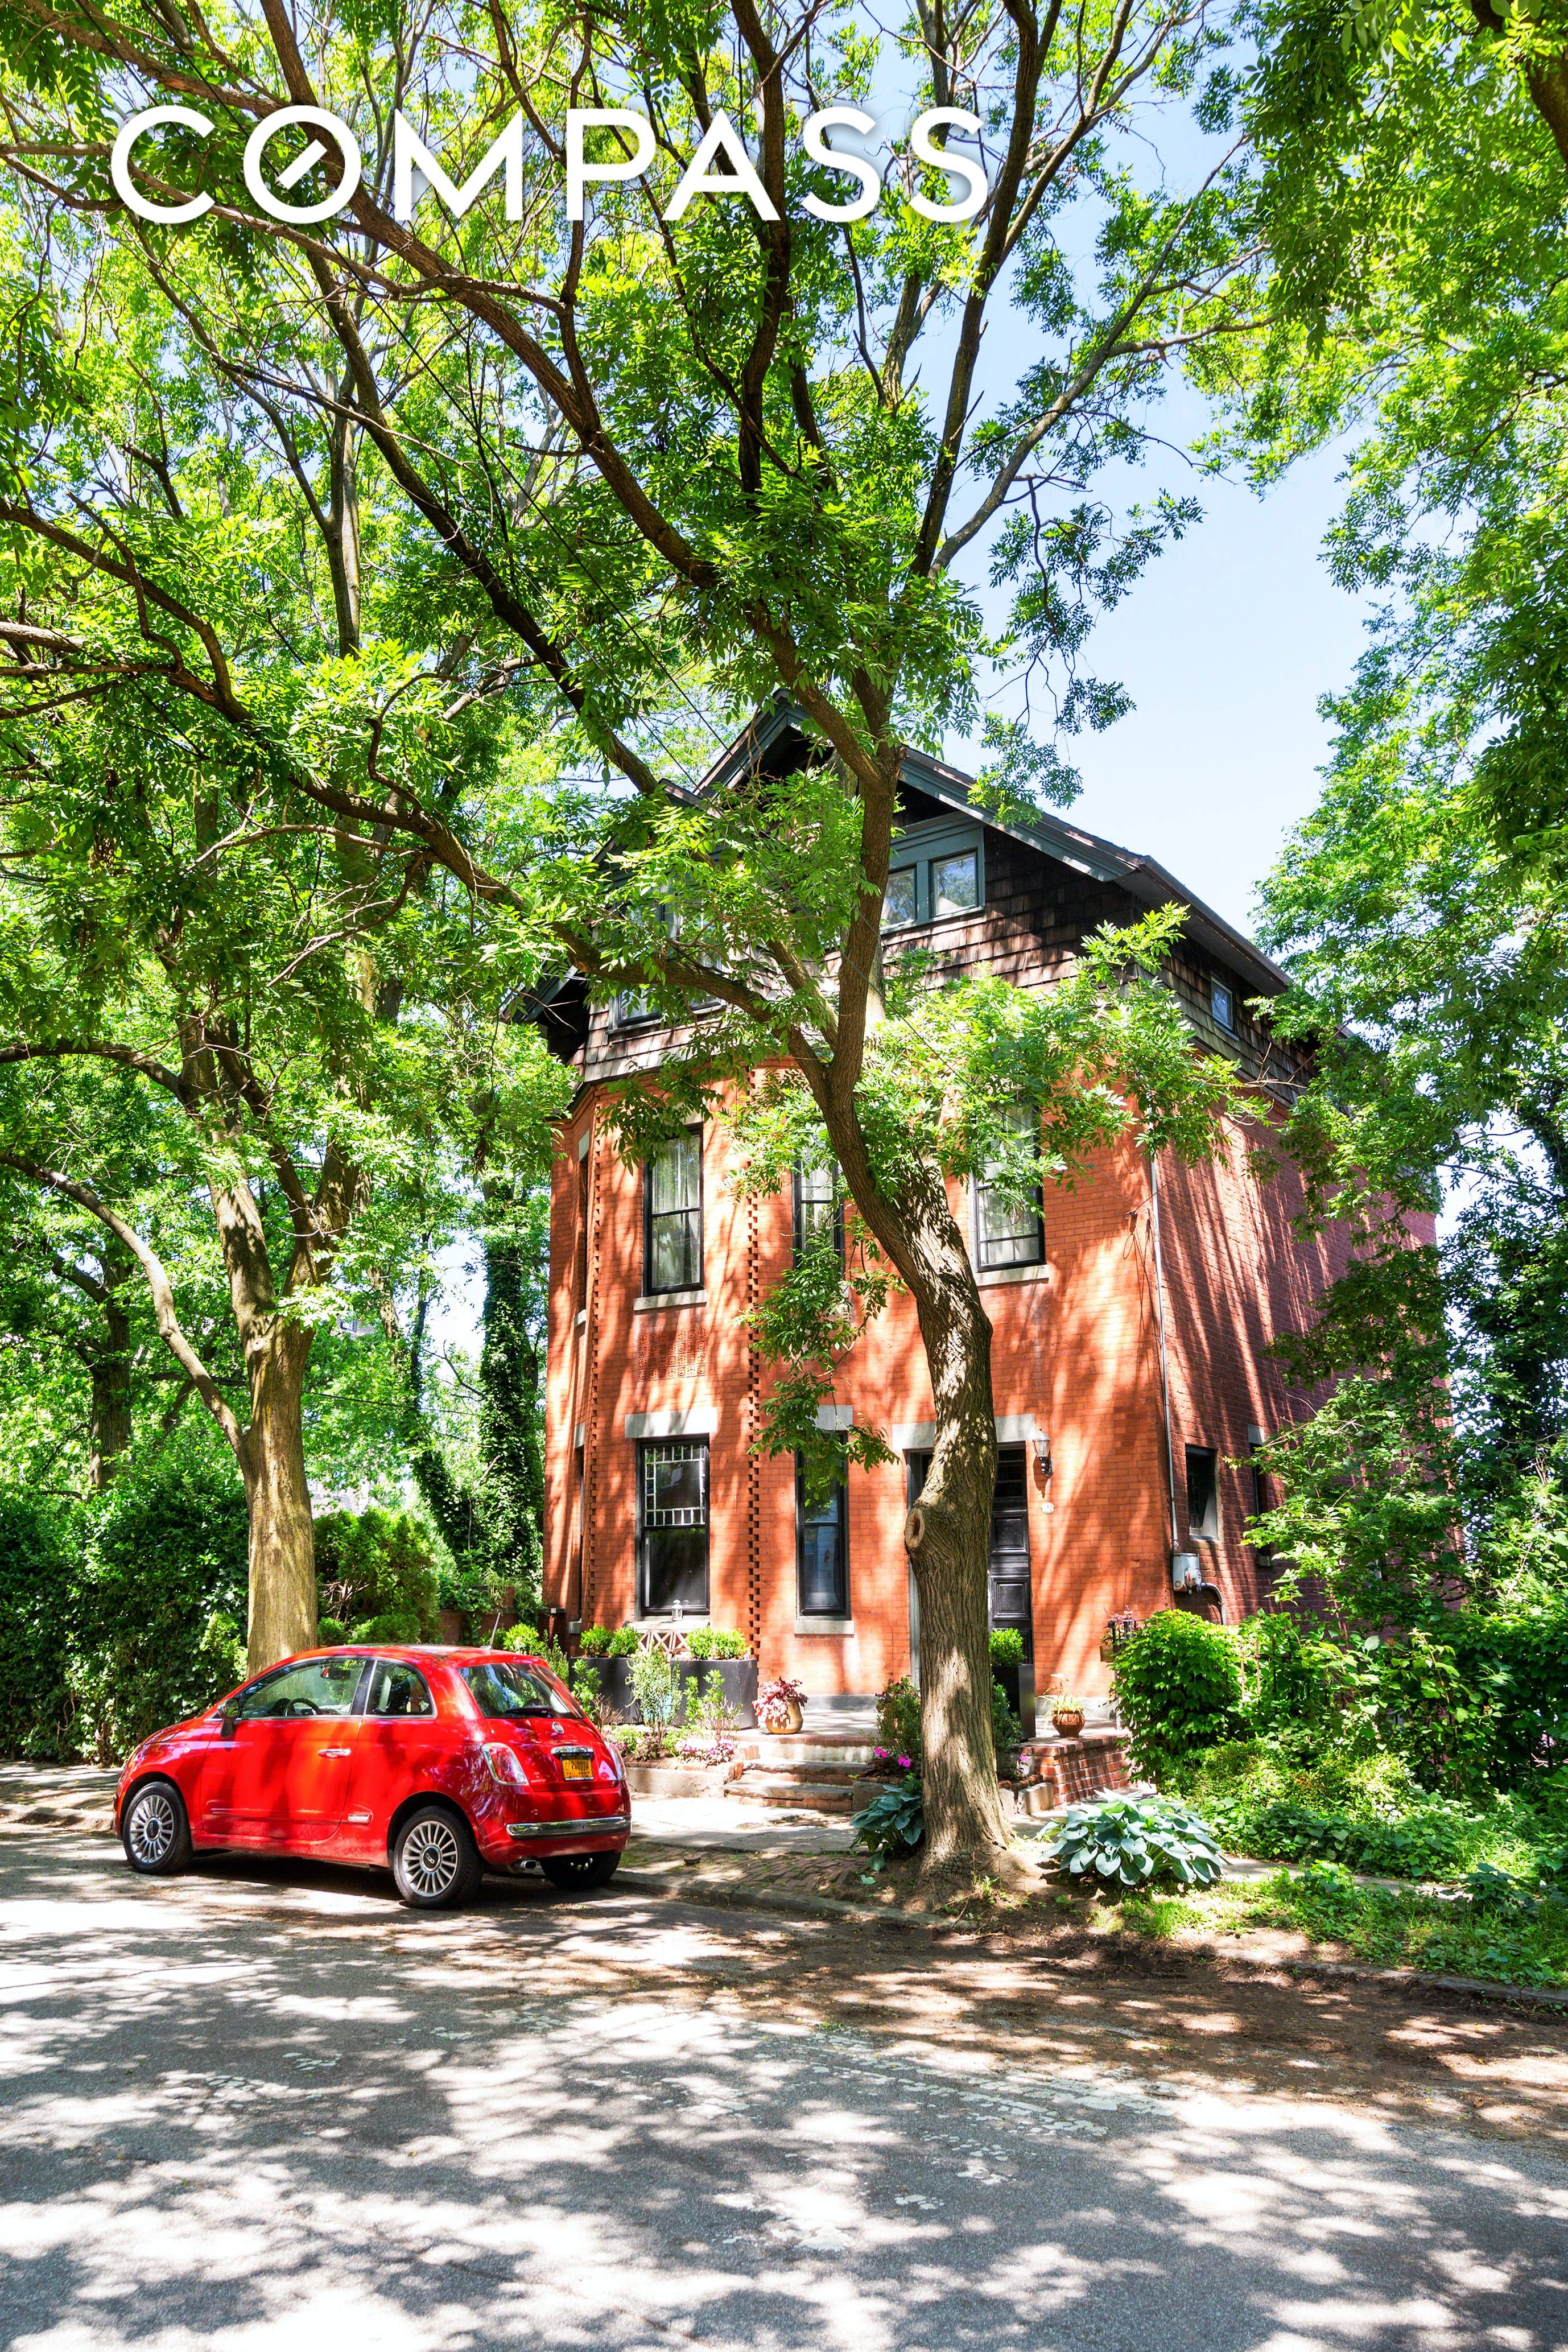 Here s your opportunity to own a unique historic property in charming St.